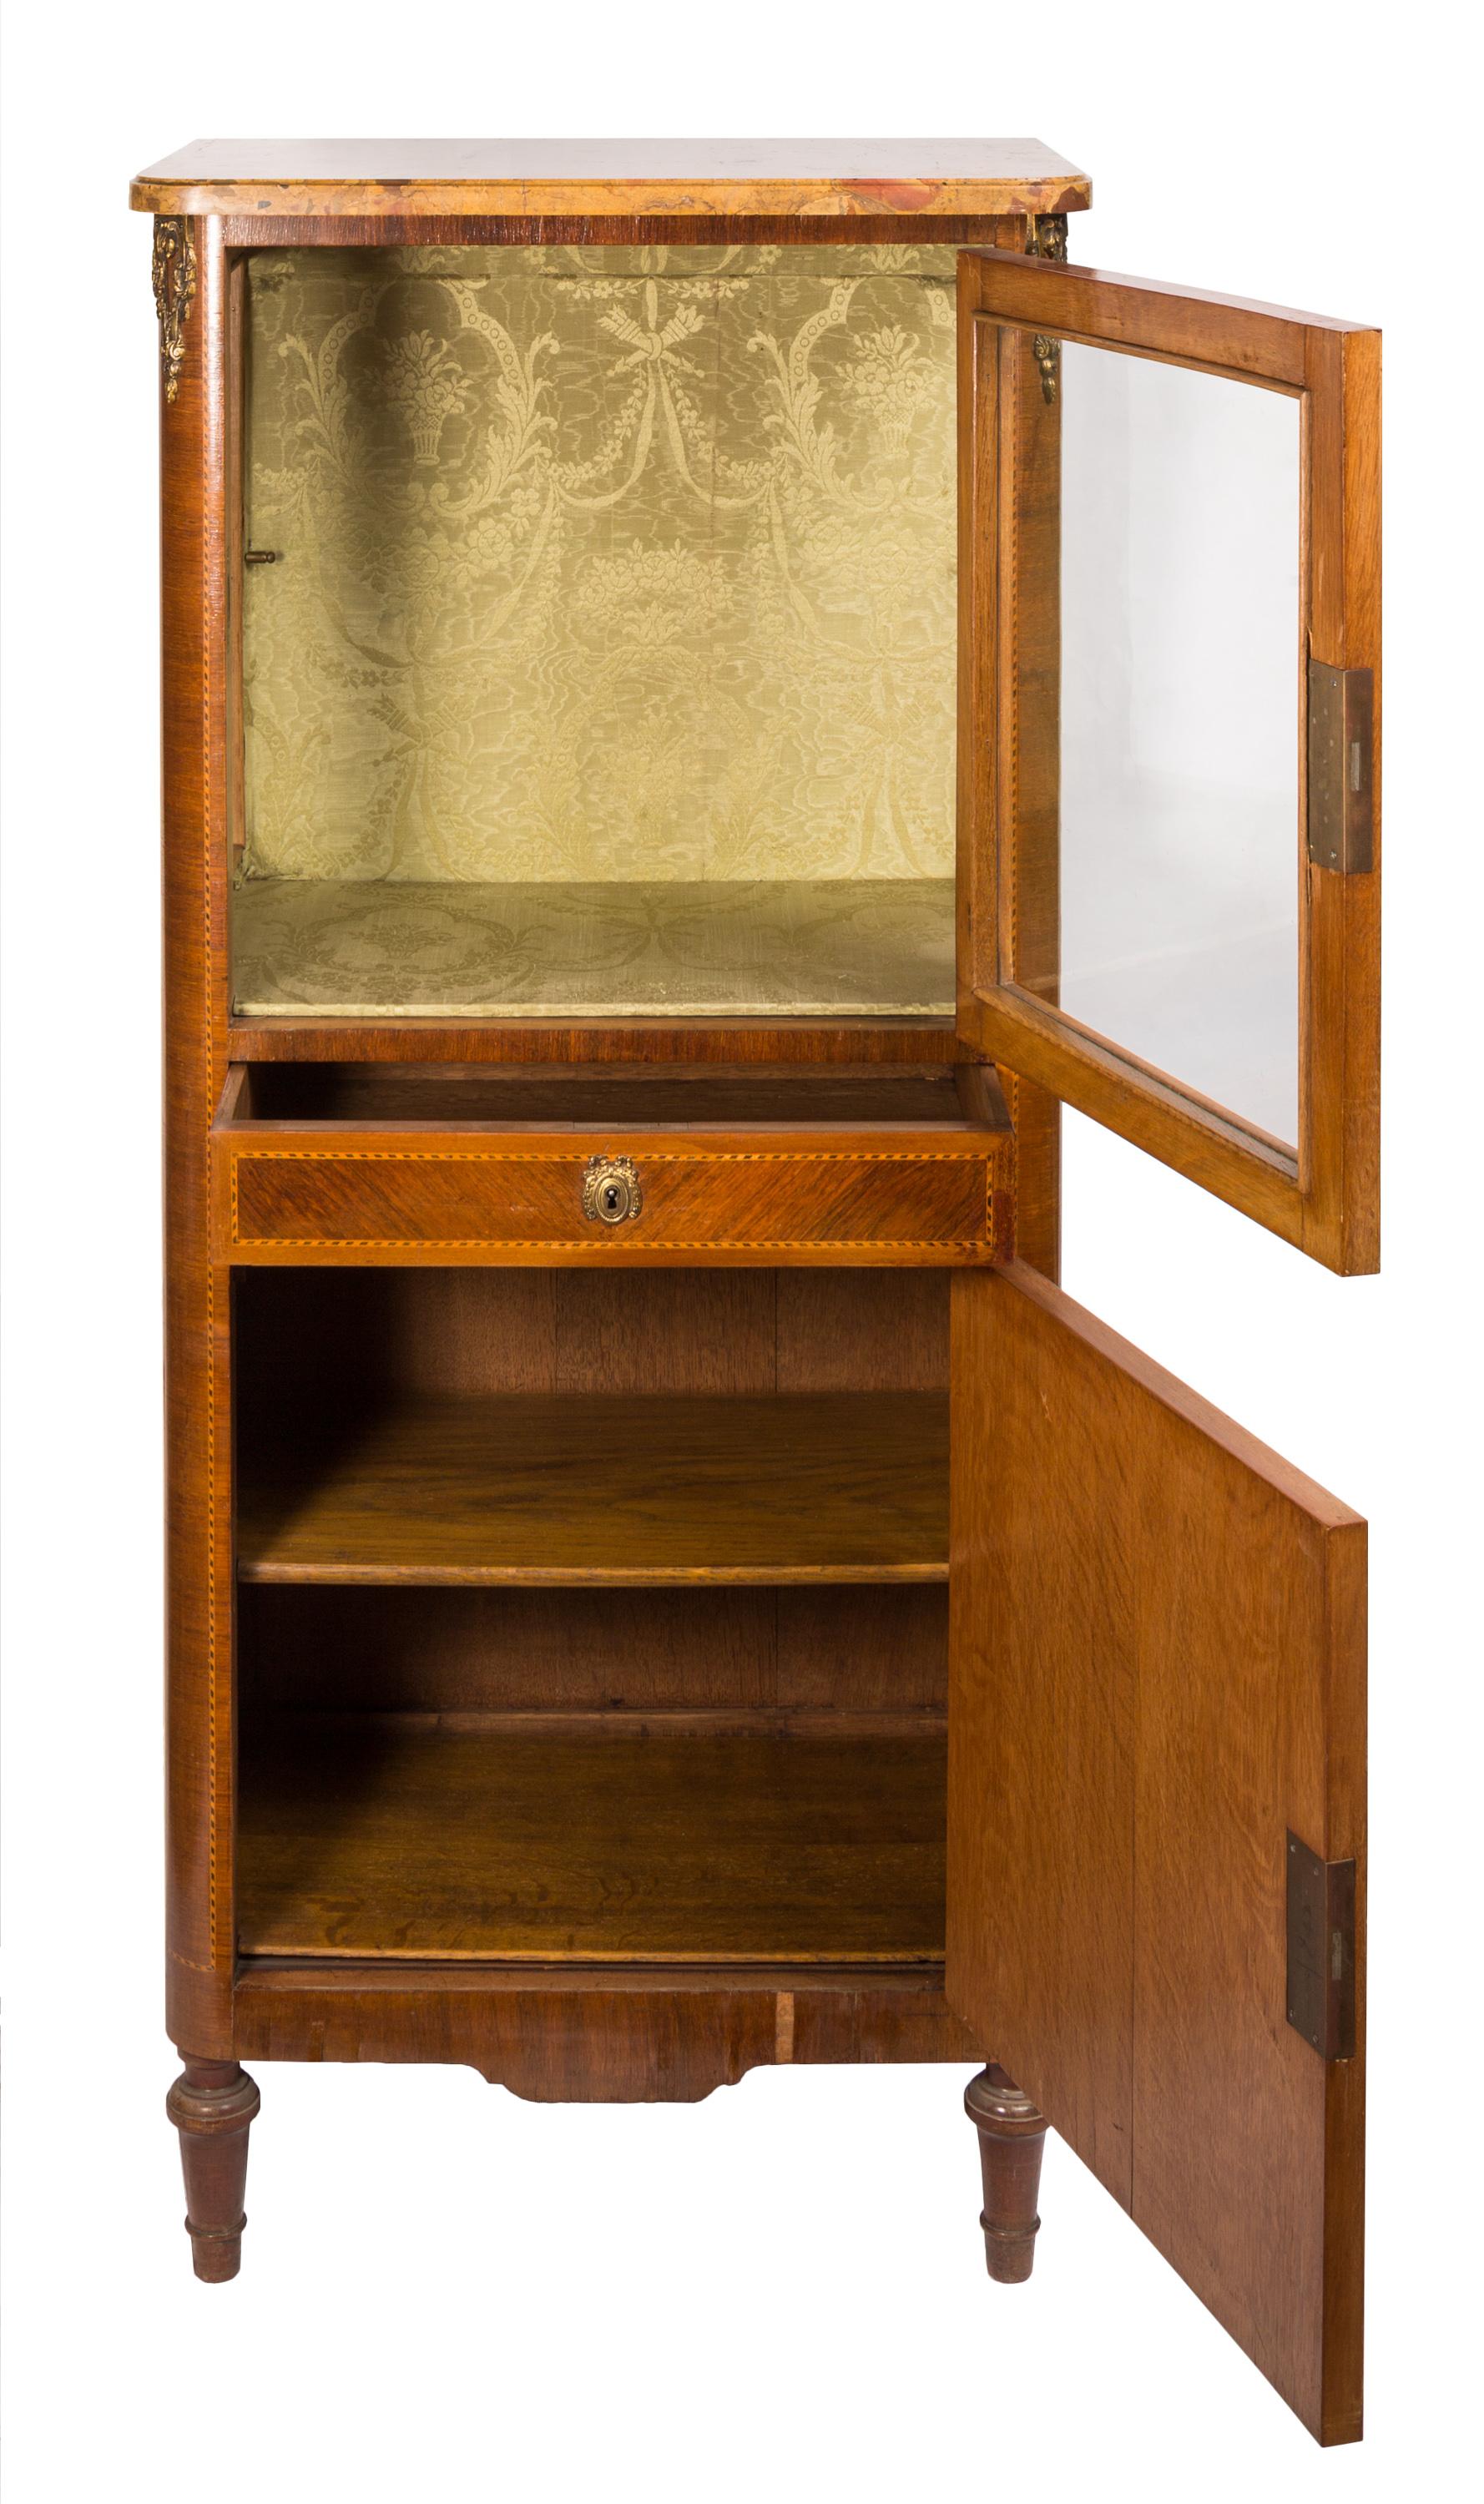 Small size French Louis XVI style display vitrine with marquetry inlay details, decorative fabric interior and marble surface top. The top half of the cabinet features glass sides and locking front door, the lower part a locking drawer and closed